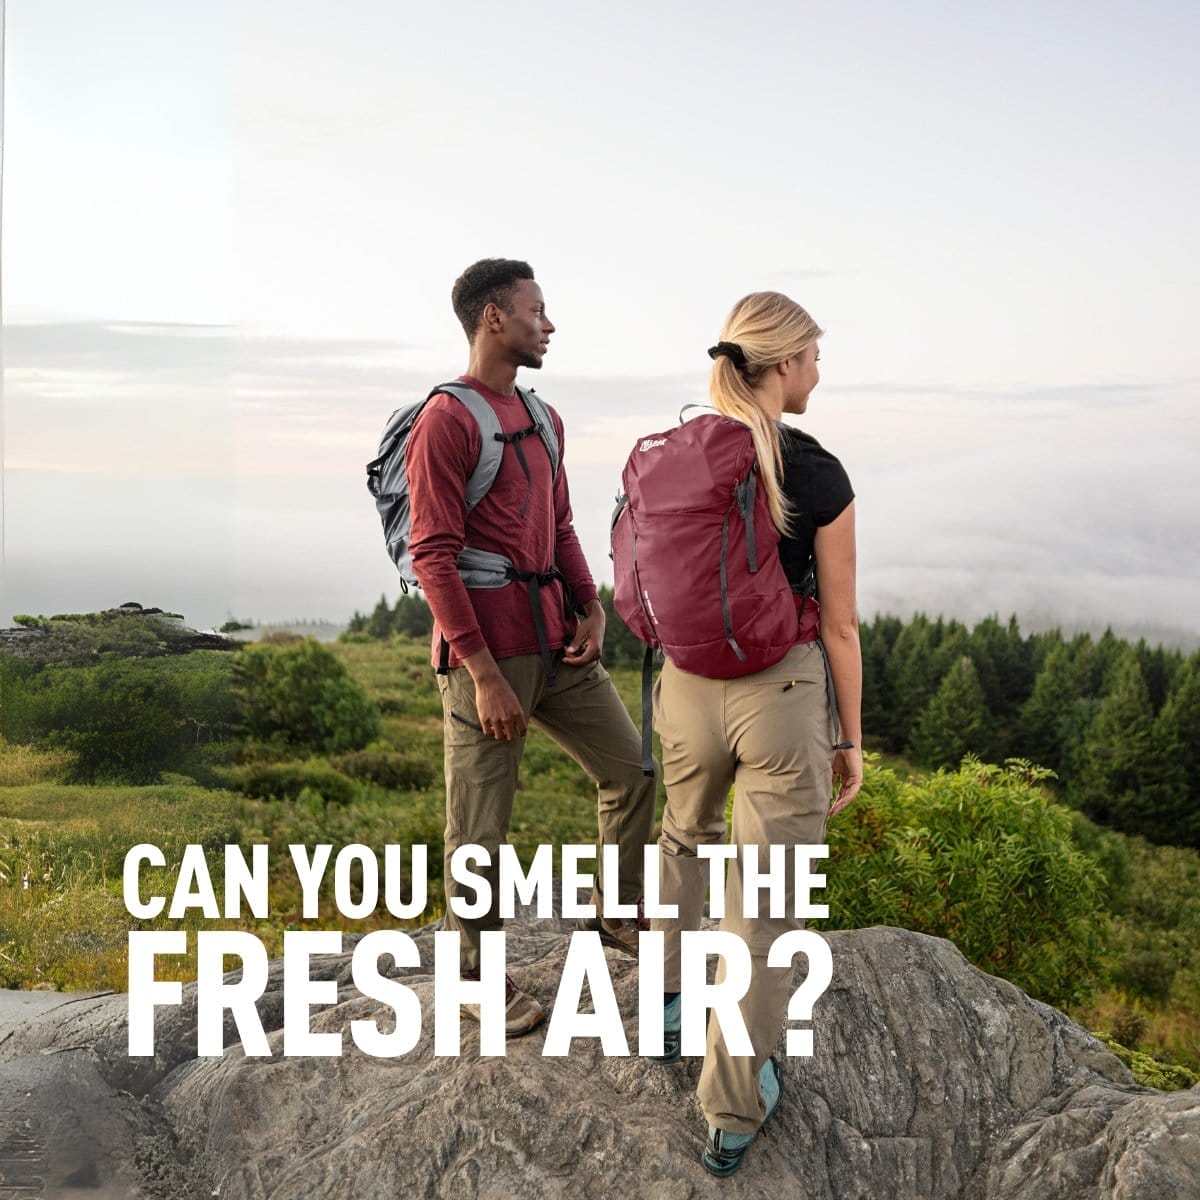 Can you smell the fresh air?